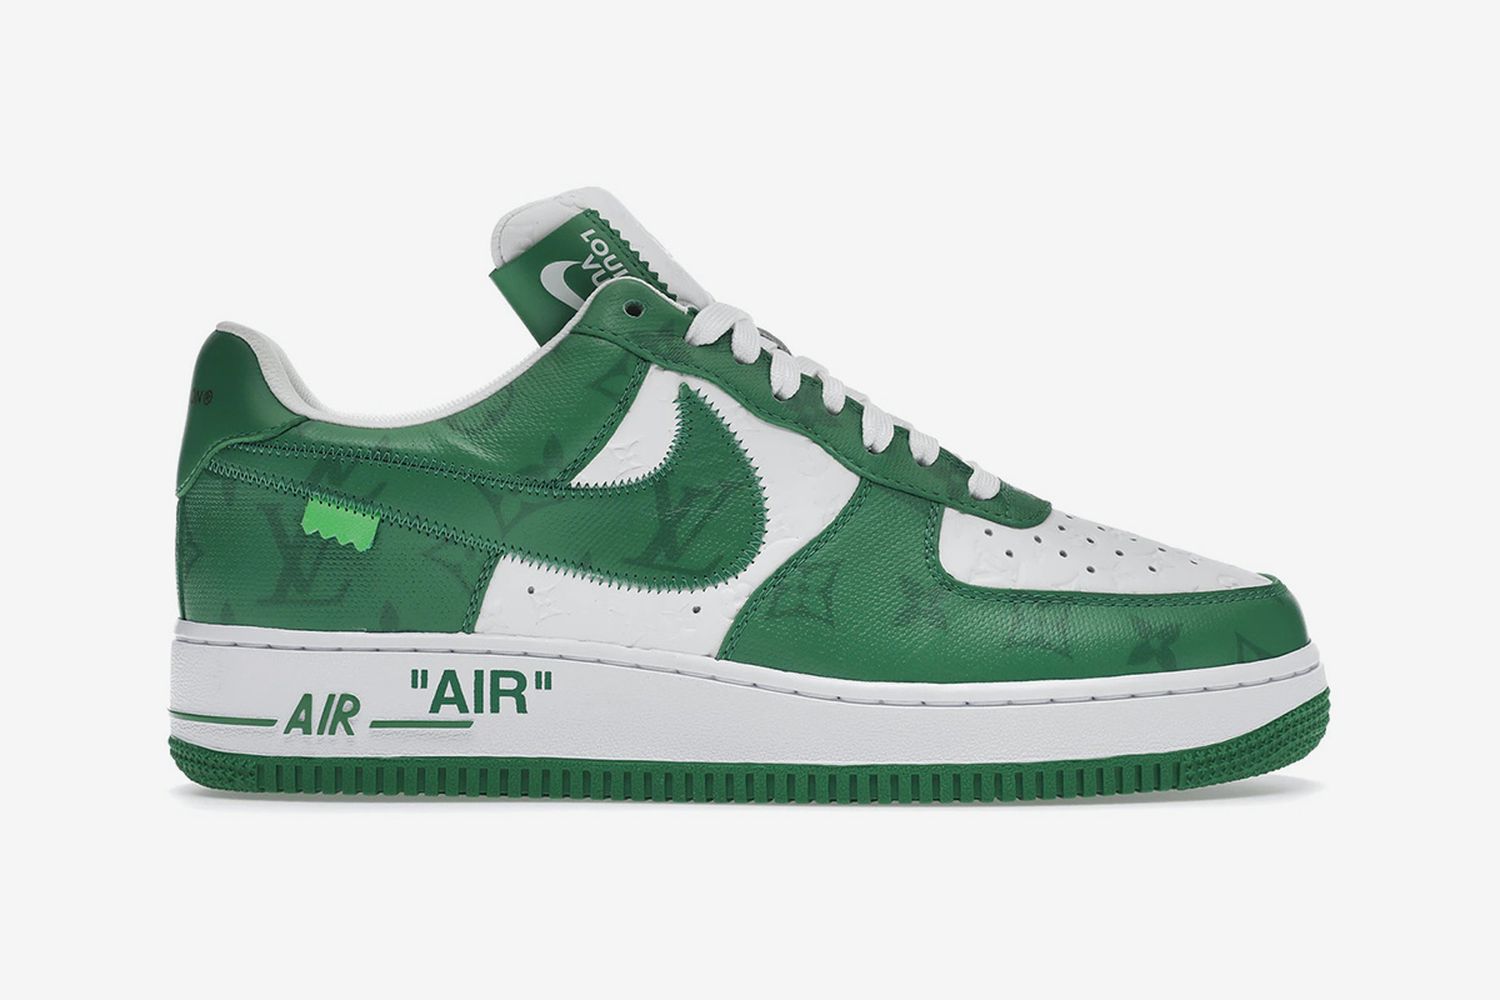 Louis x Nike Air Force 1: Where to Buy & Resale Prices